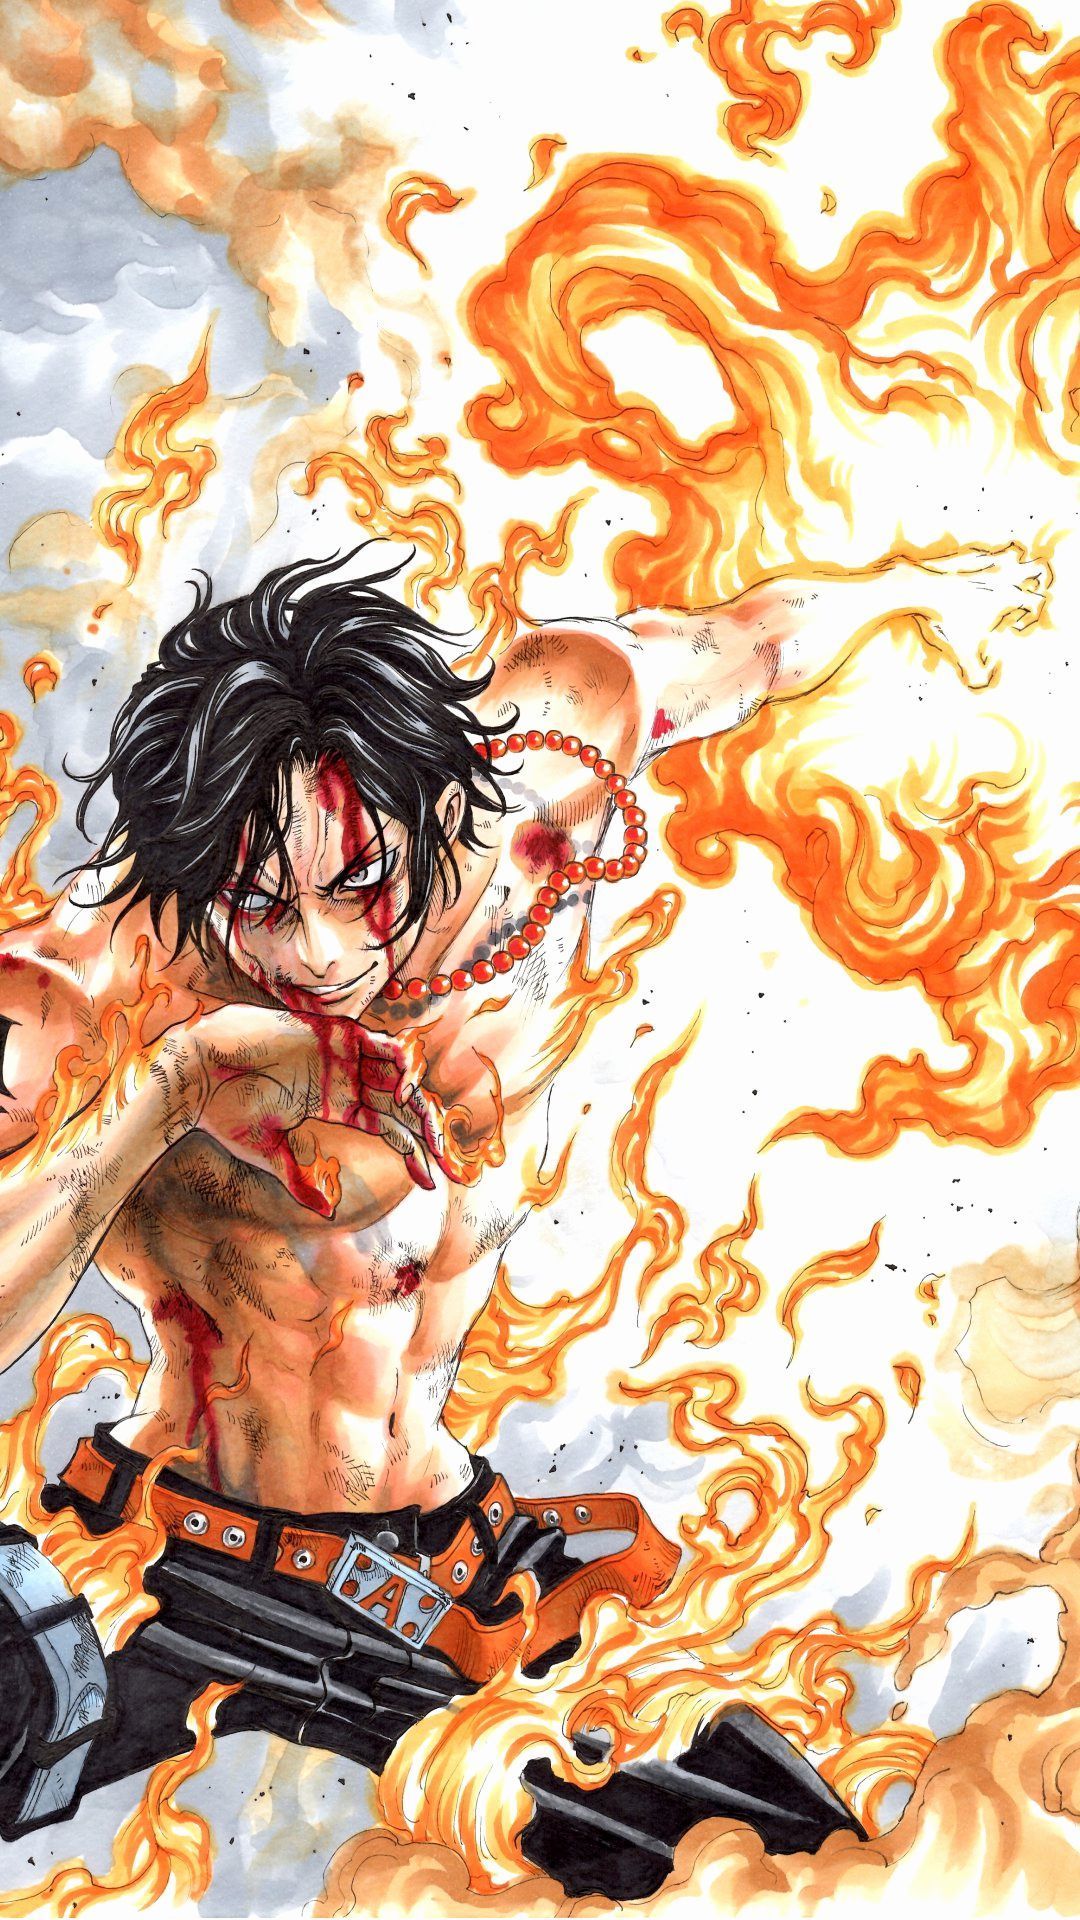 Ace One Piece Wallpaper iPhone with image resolution 1080x1920 pixel. You can make this wallpaper for your iPhone 5, 6, 7, 8, X backgrounds, Mobile Screensaver, or iPad Lock Screen - One Piece